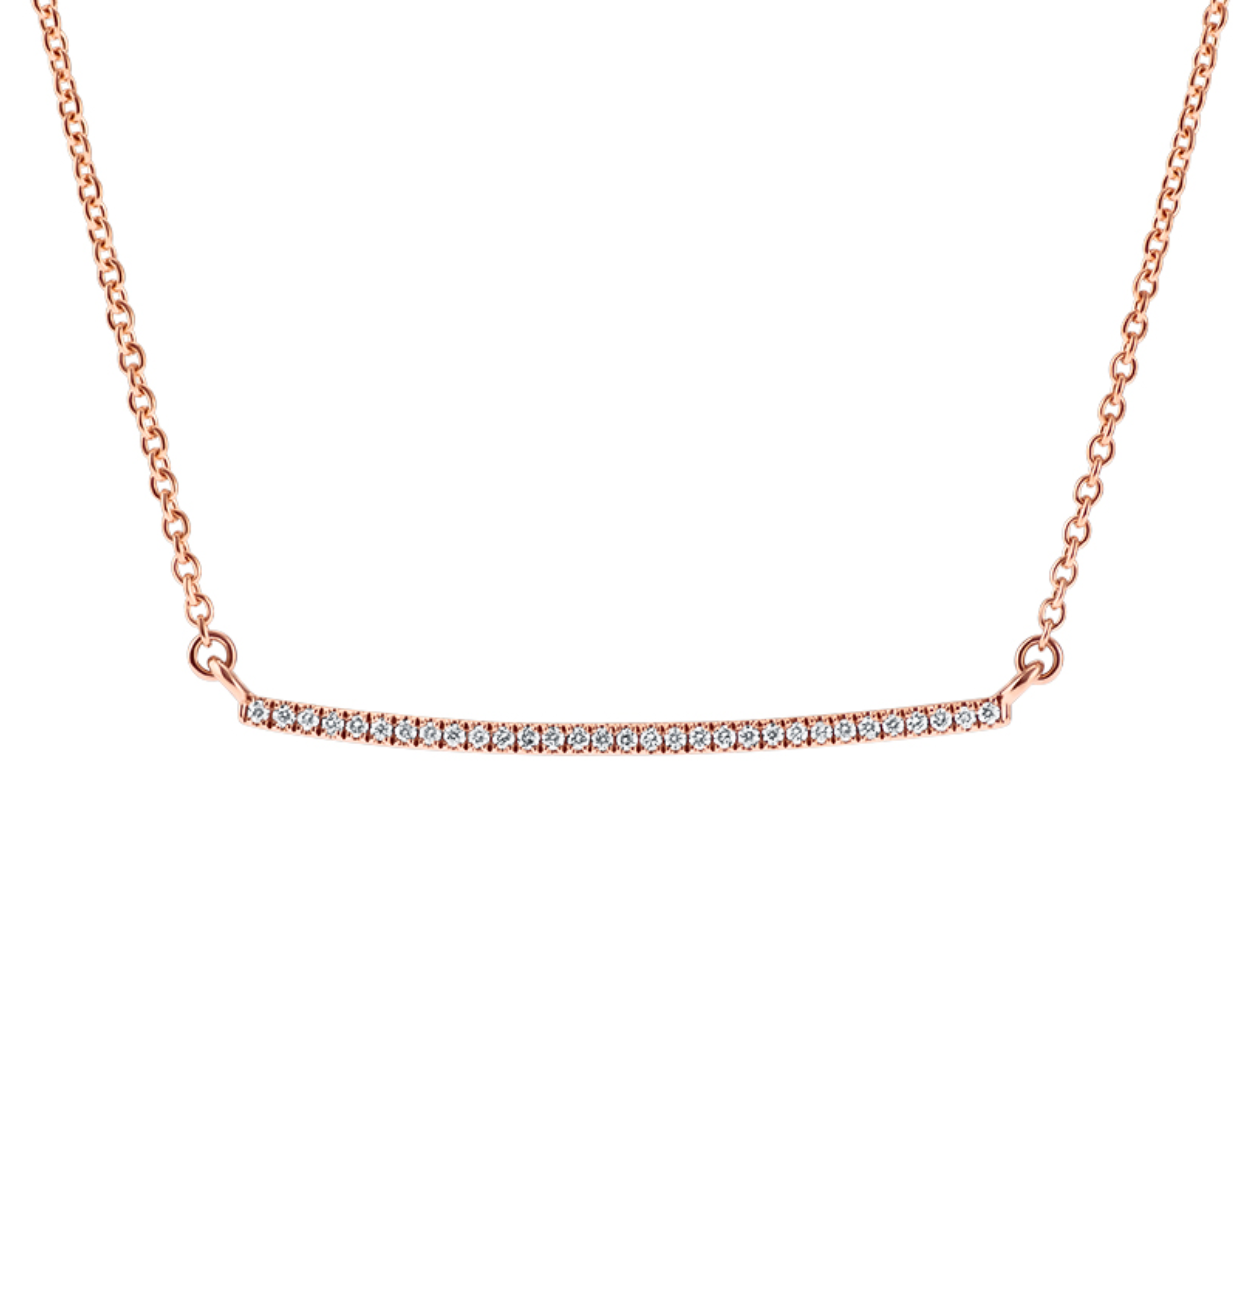 Diamond Bar Necklace in White, Yellow or Rose Gold - Talisman Collection Fine Jewelers